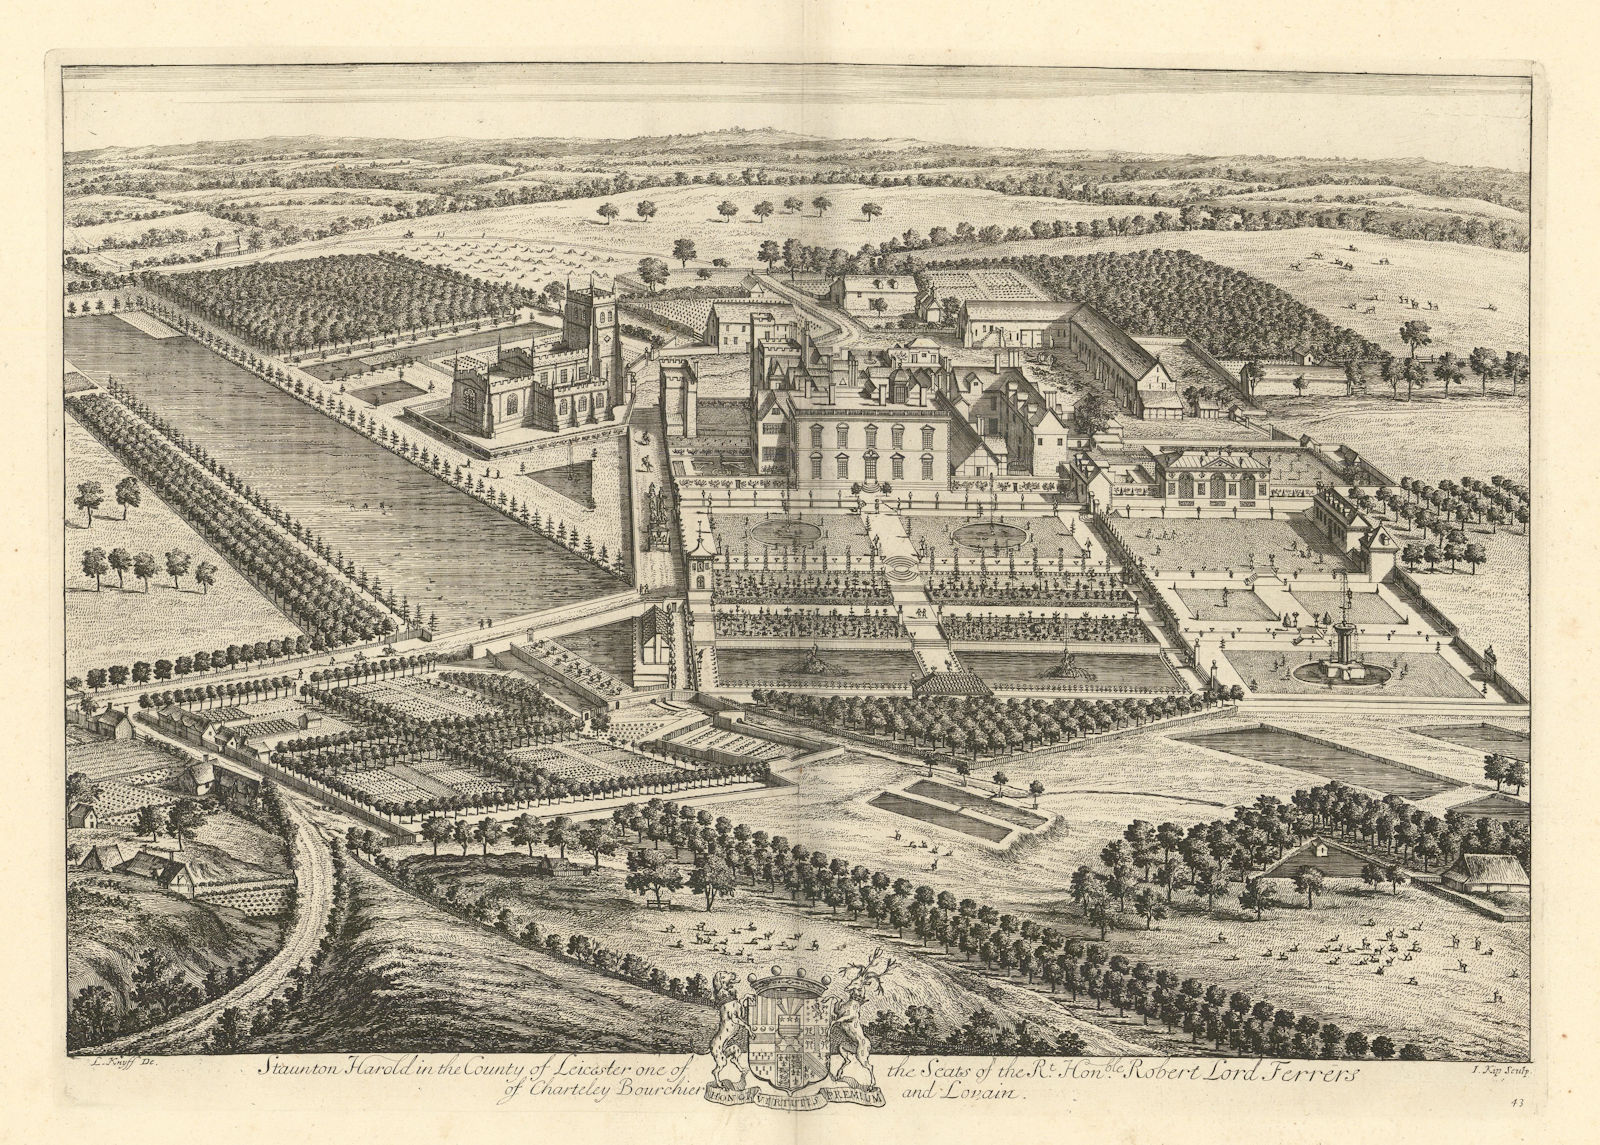 "Staunton Harold in the County of Leicester" by Kip & Knyff. Leicestershire 1709